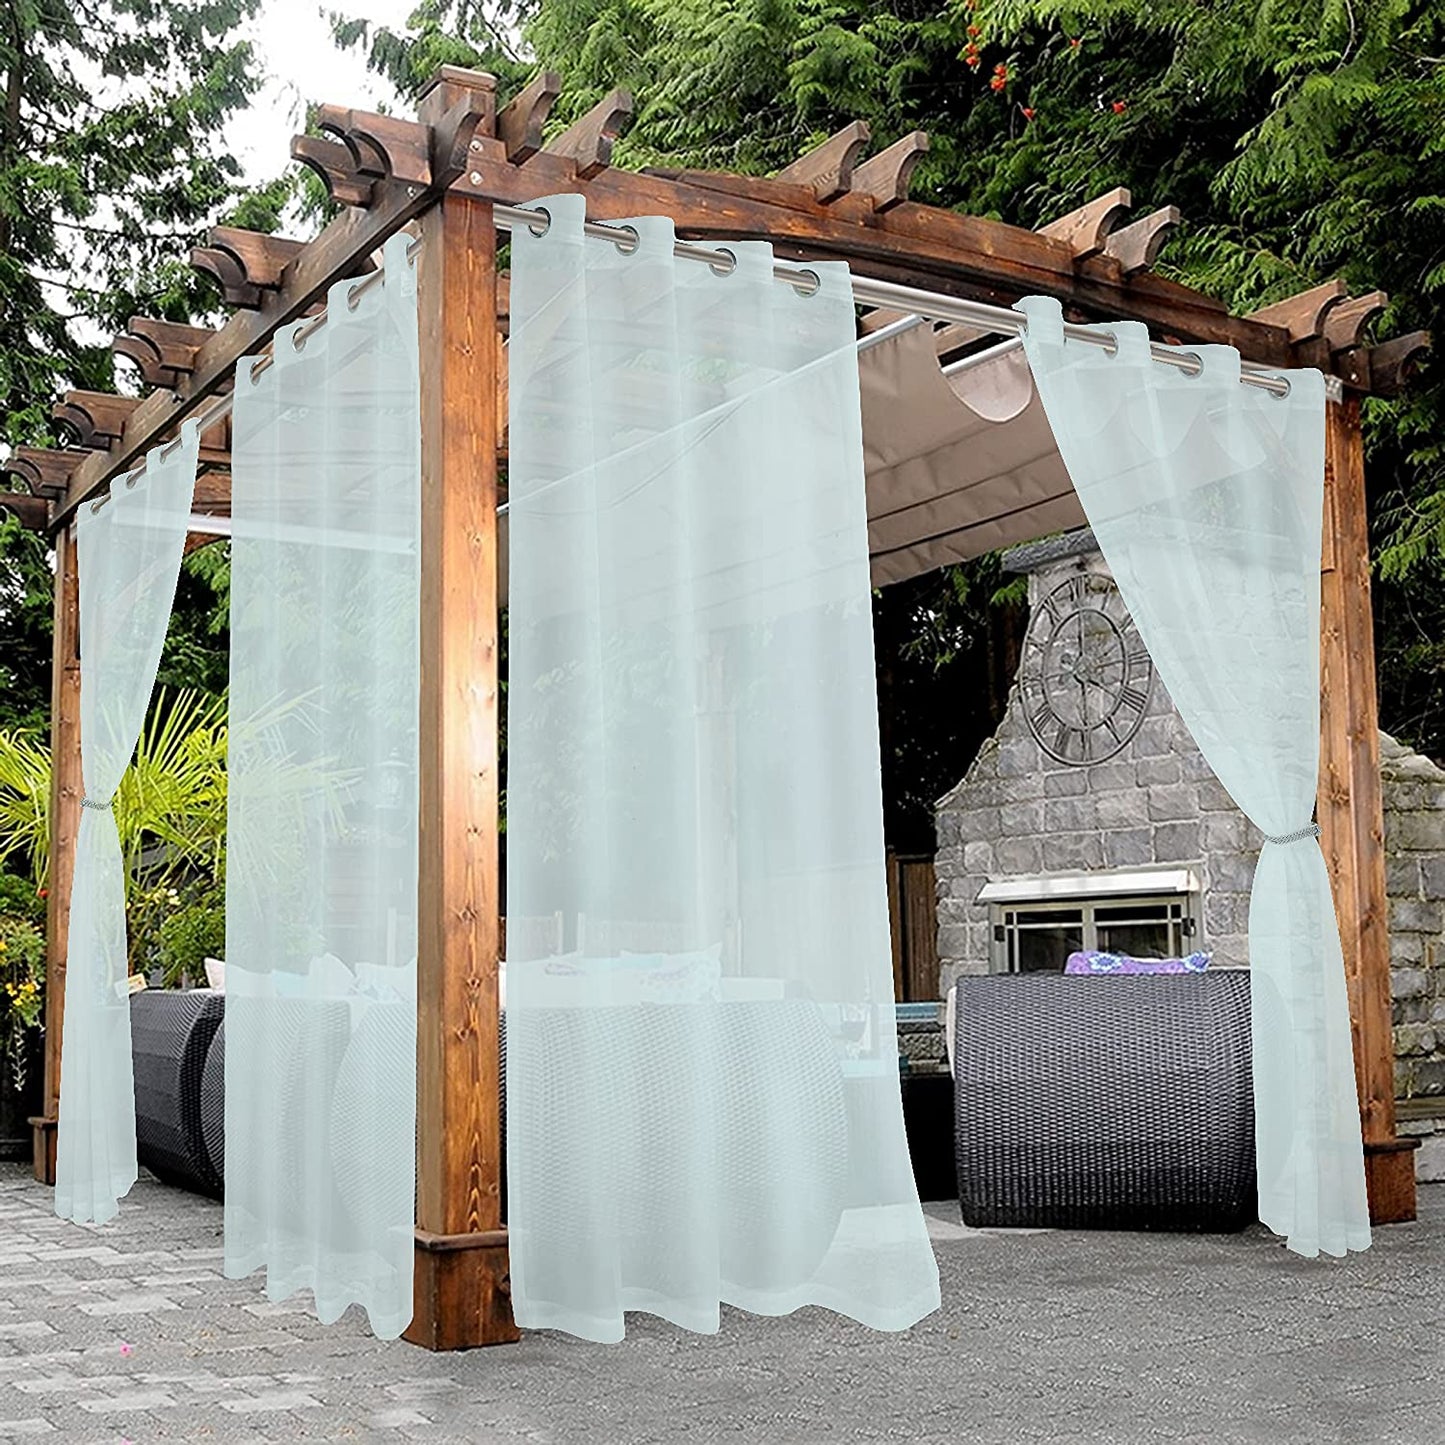 BONZER White Outdoor Sheer Curtains for Patio Waterproof - 2 Panels Grommet Indoor Voile Sheer Curtain for Living Room, Bedroom, Porch, Pergola, Cabana,54 X 84 Inch, White  BONZER Seafoam 54W X 95L Inch 